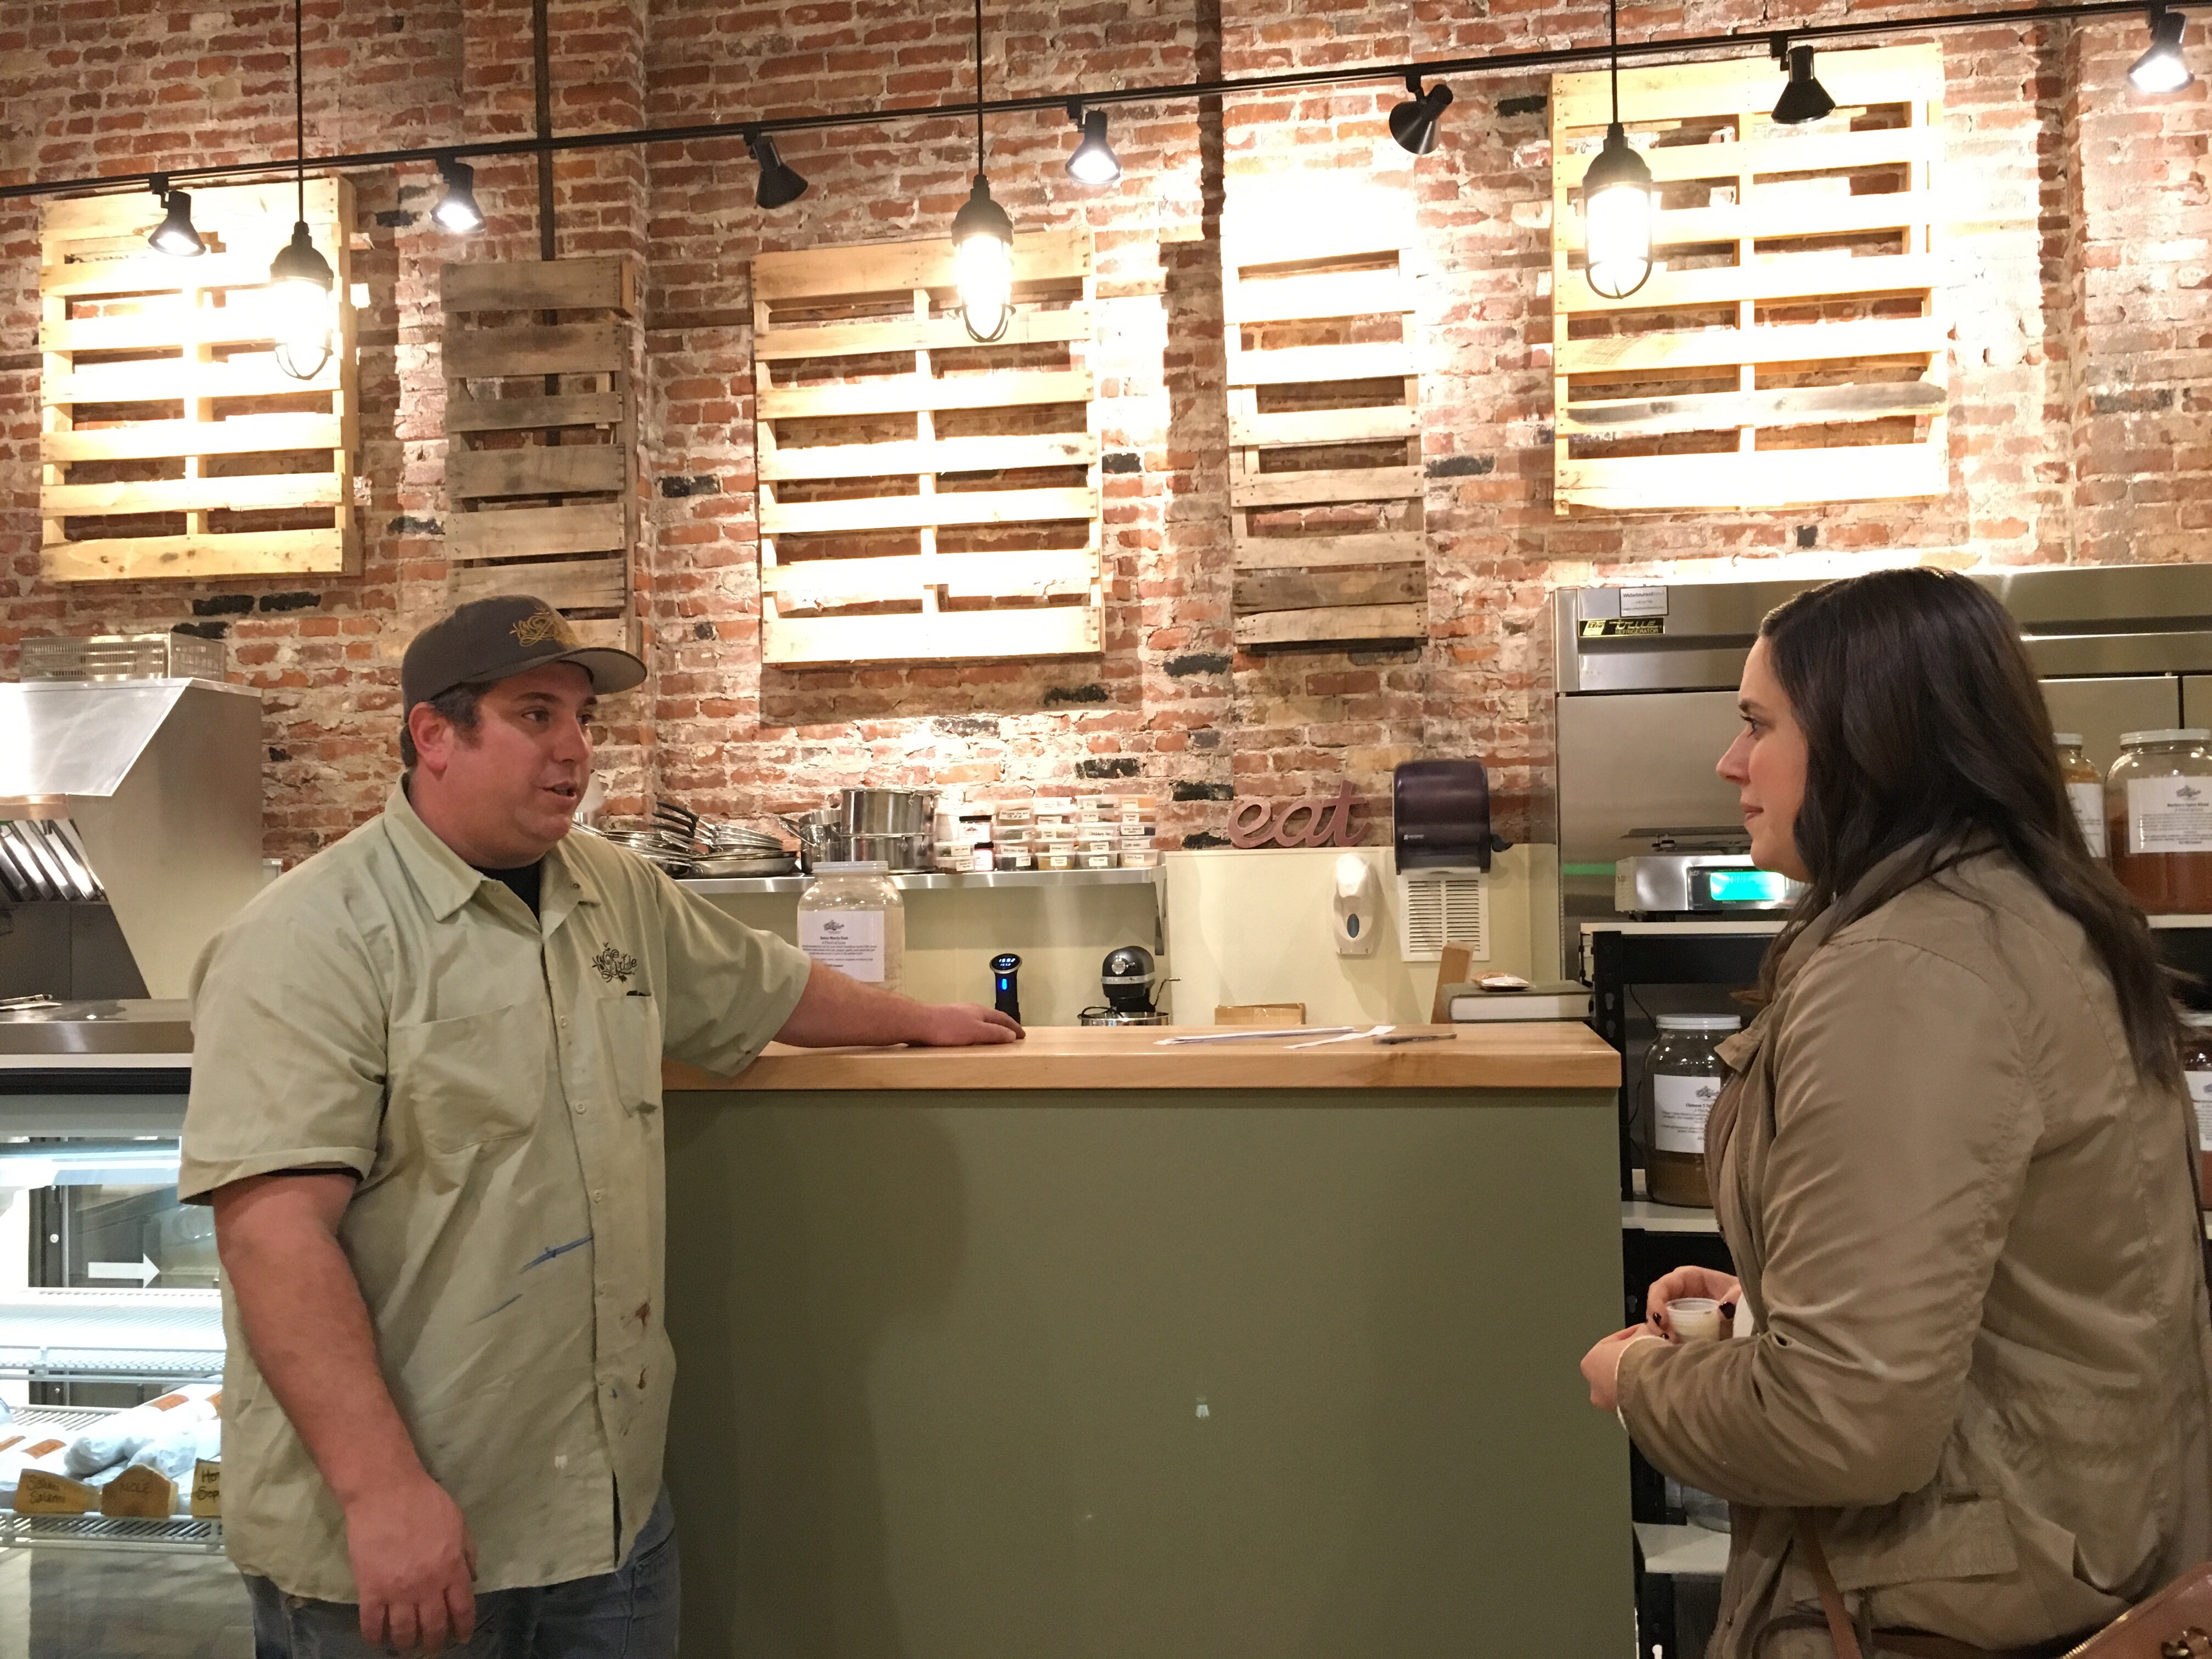 Drizzle co-owner Ross Driscoll shares his passion for fine yet approachable foods and flavors with Lindsey VanderHoek of ourLynden.